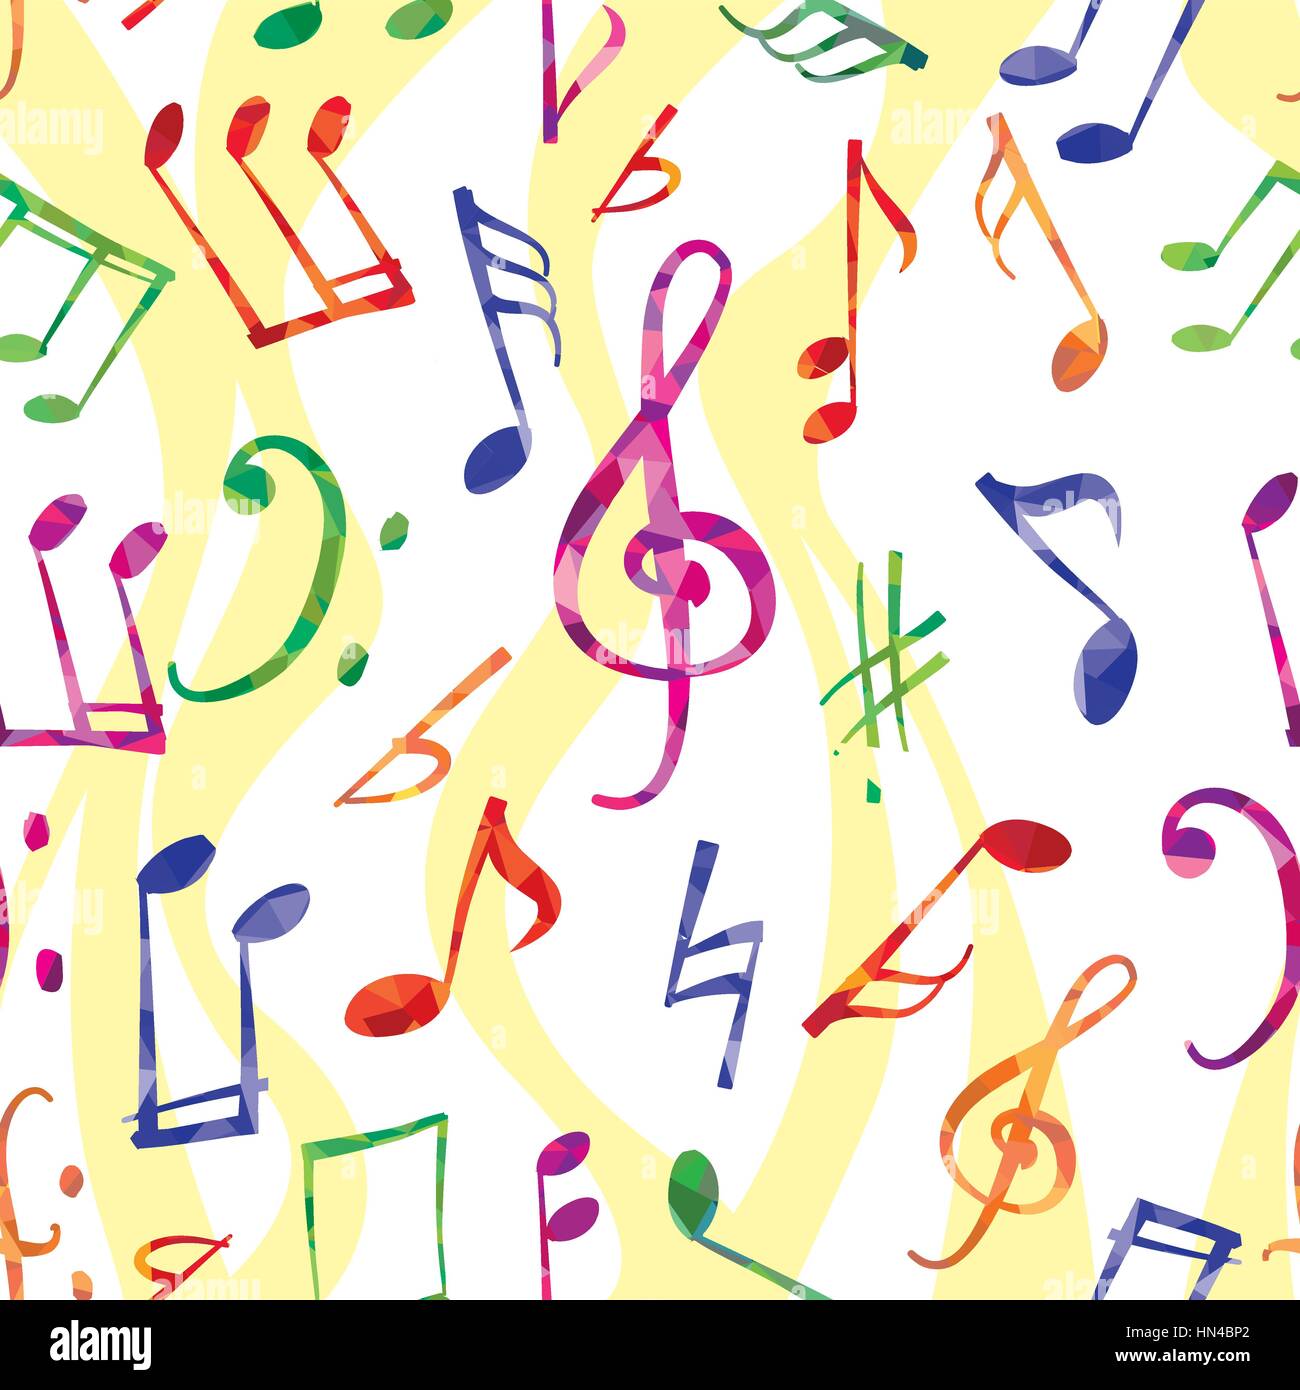 Musical pattern. Music notes and signs seamless background Stock Vector